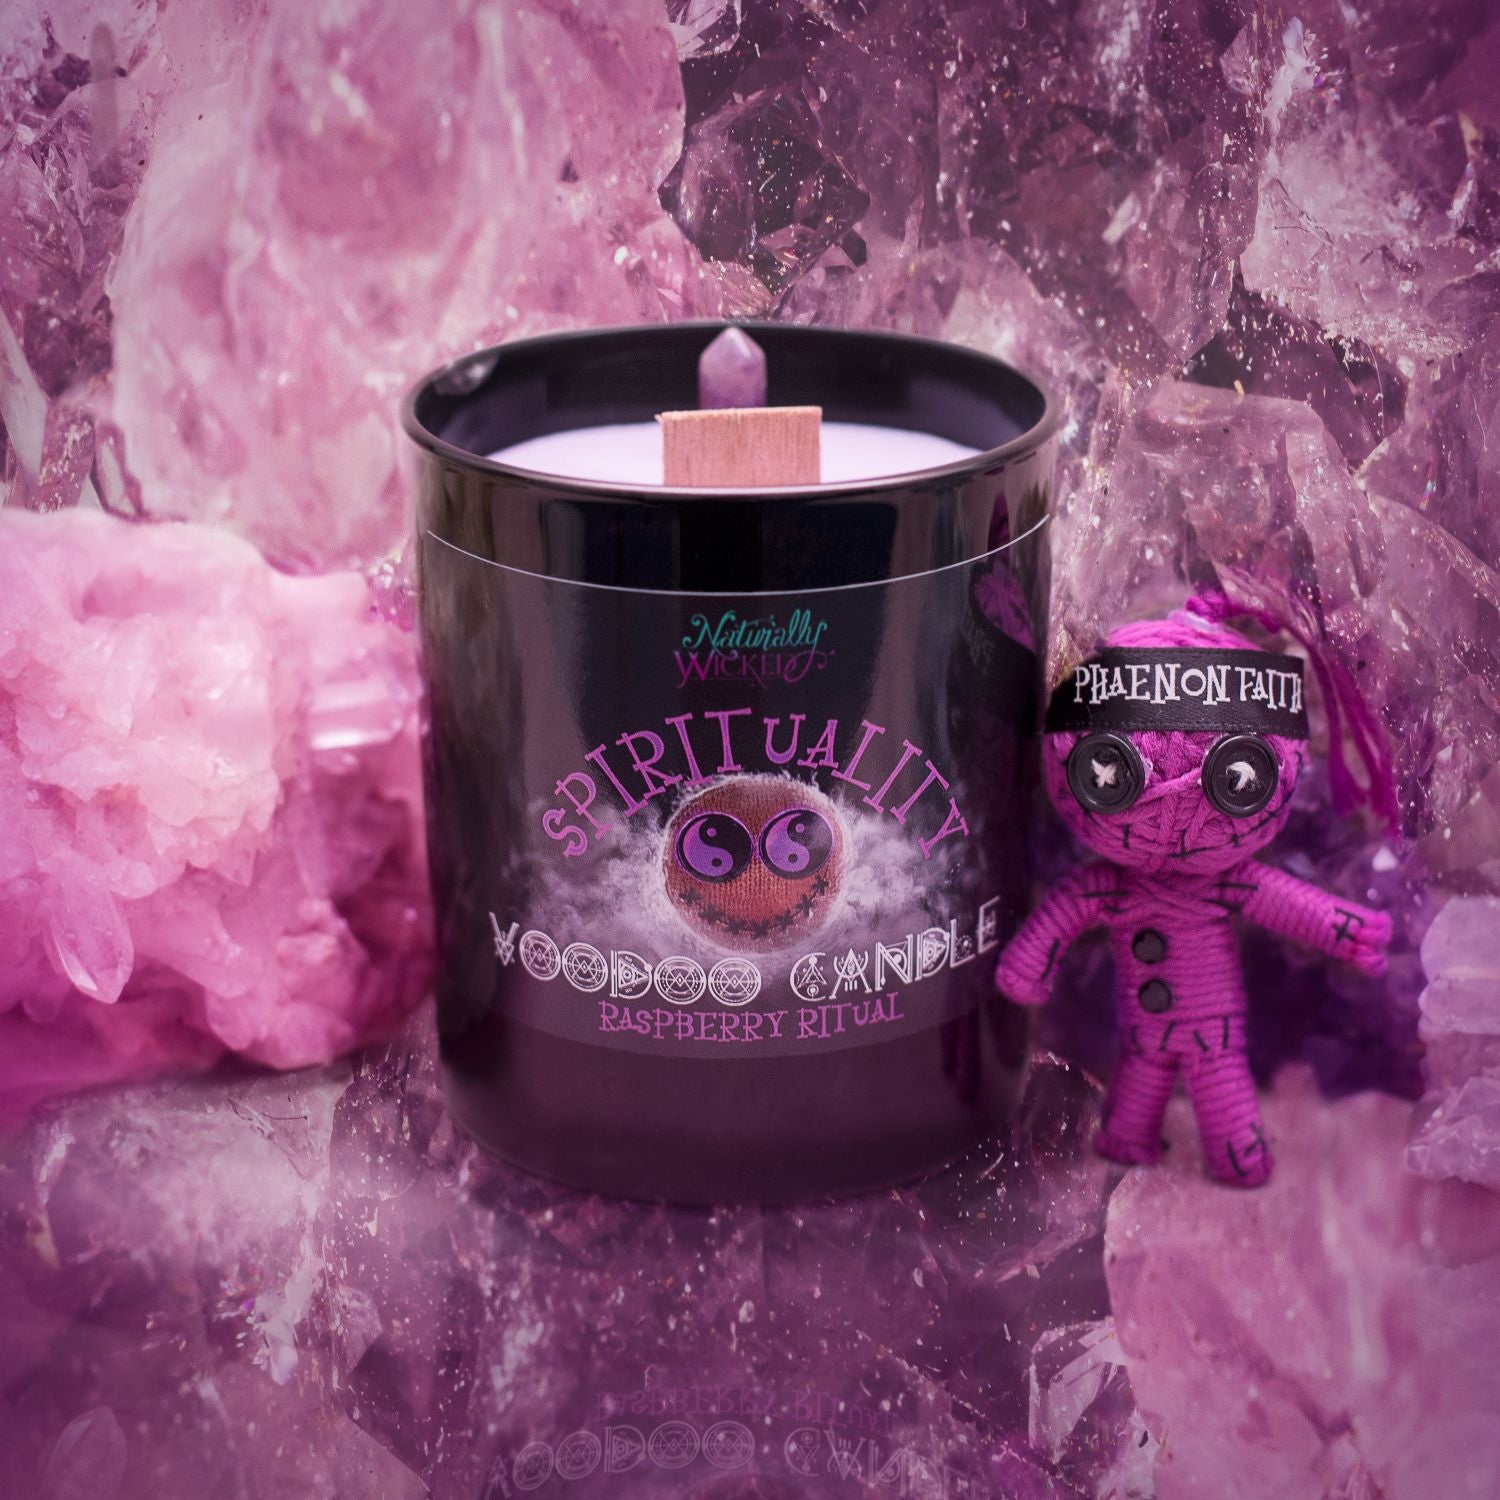 Naturally Wicked Spirituality Candle Entombed With Crystal Wand & Crackling Wood Wick Beside Purple Spirituality Voodoo Doll